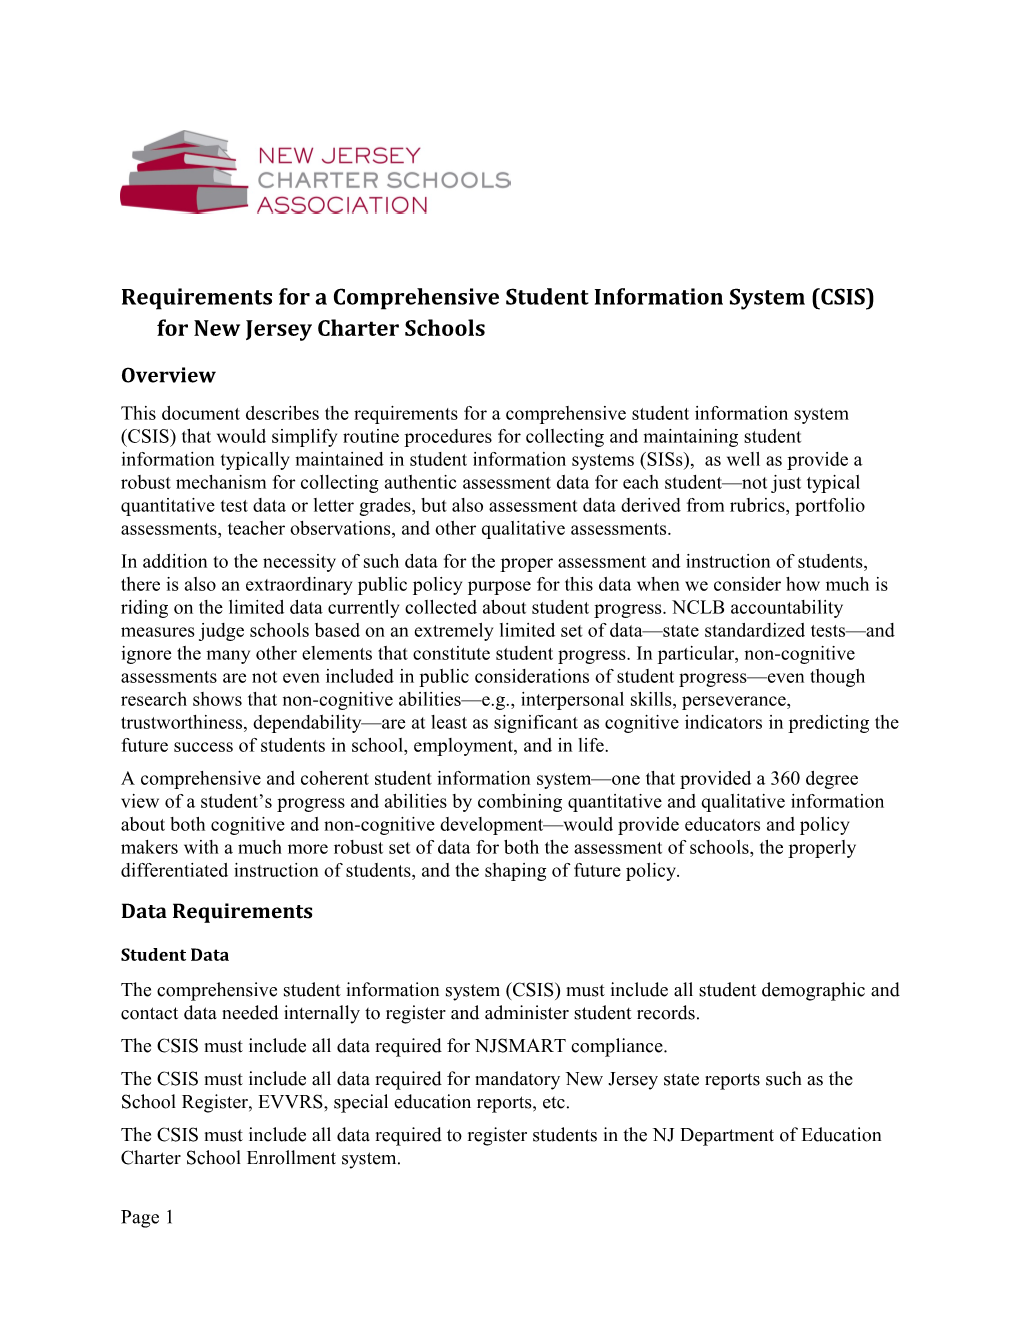 Requirements for a Comprehensive Student Information System (CSIS) for New Jersey Charter